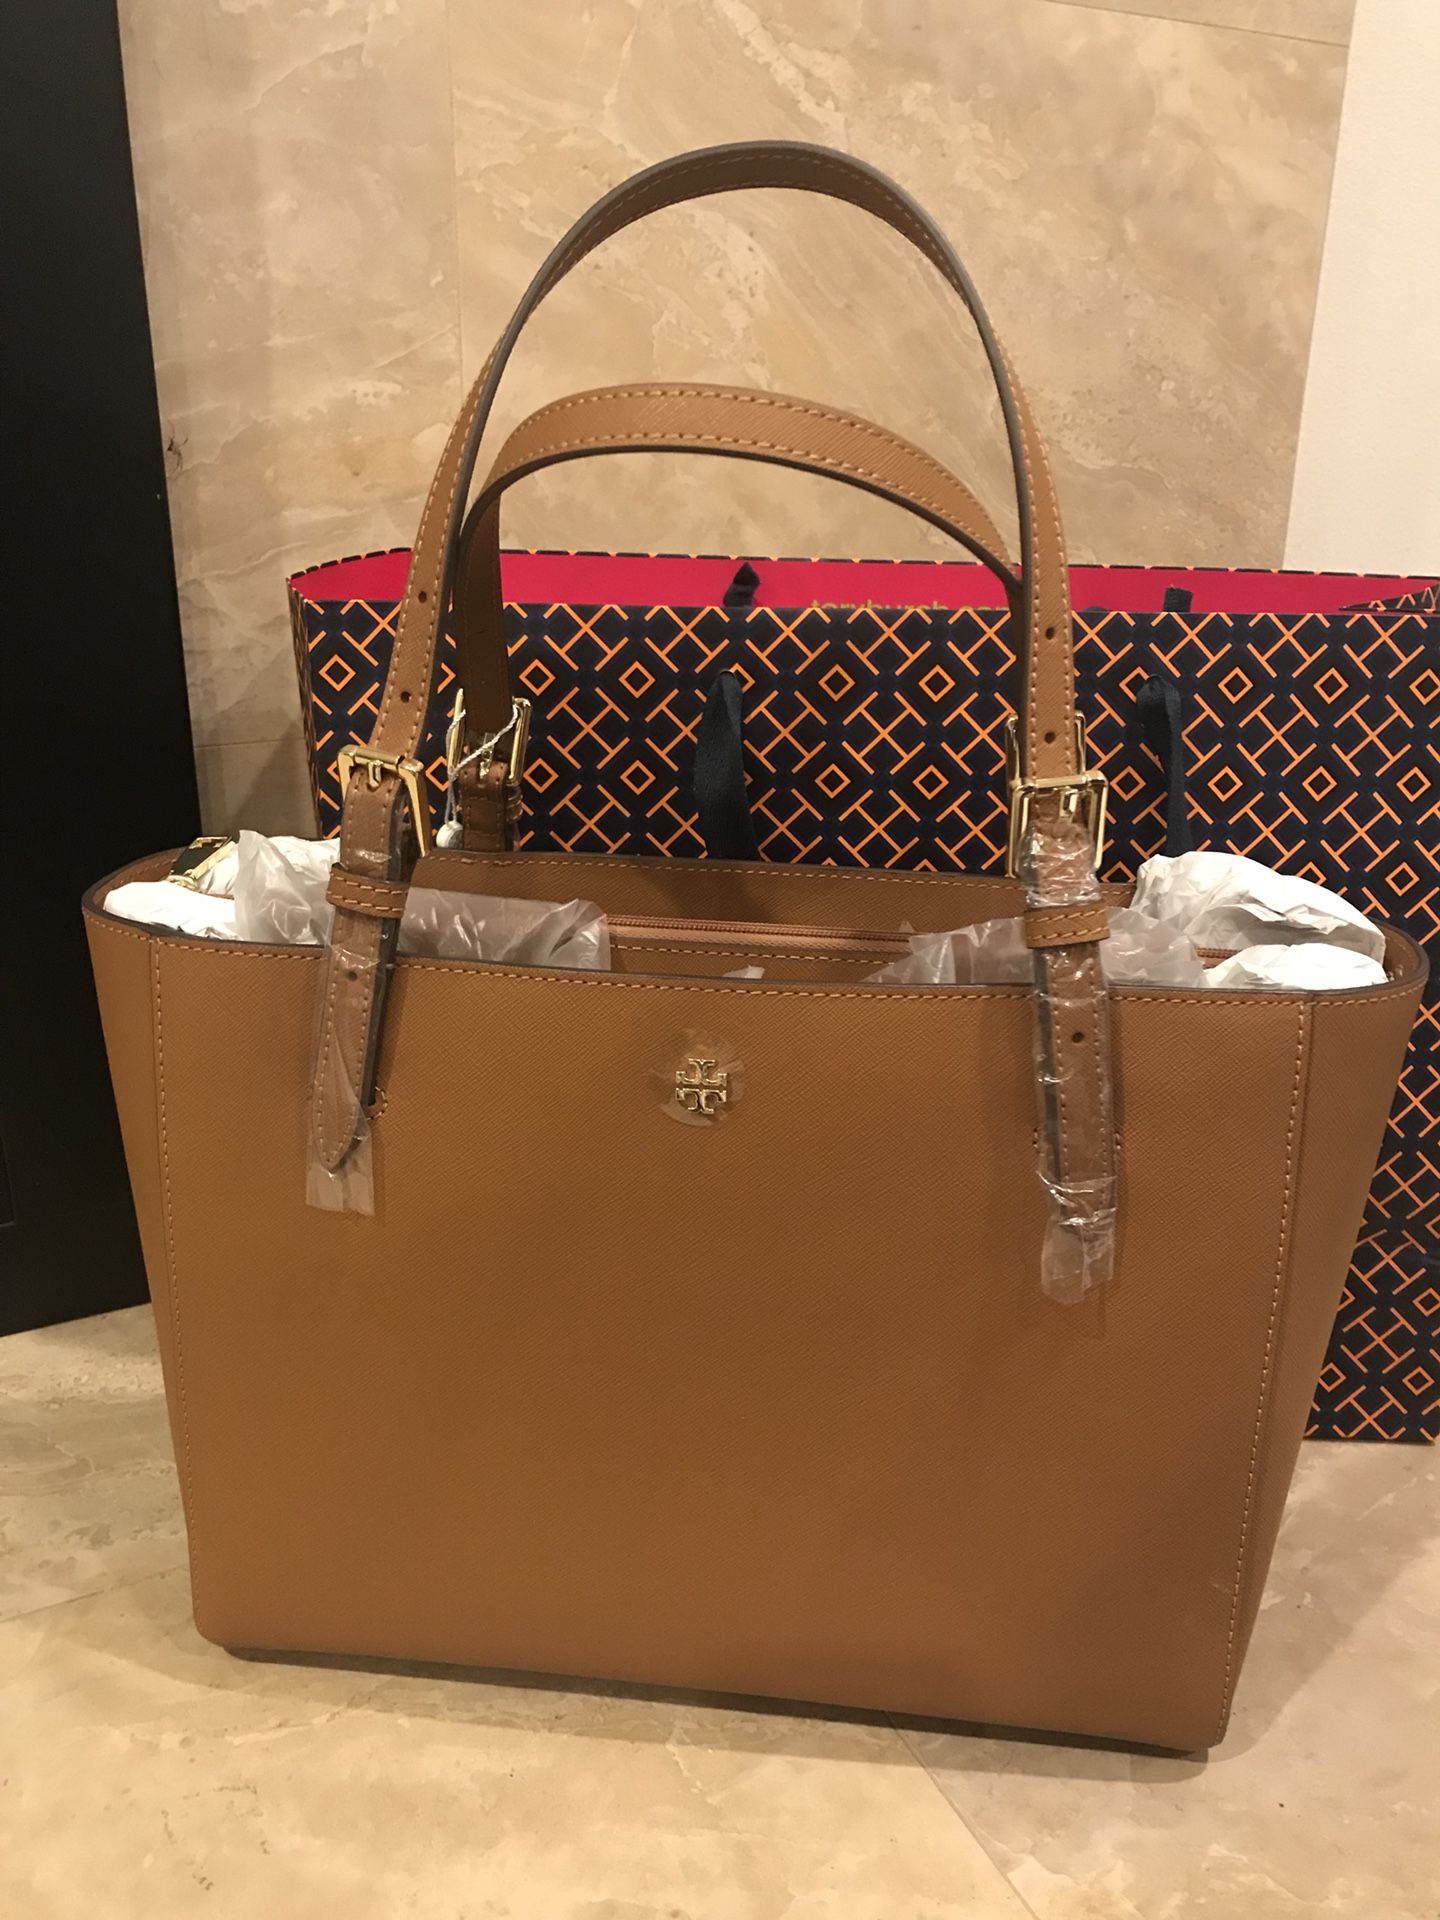 Tory Burch brown small buckle tote purse new with tags for Sale in